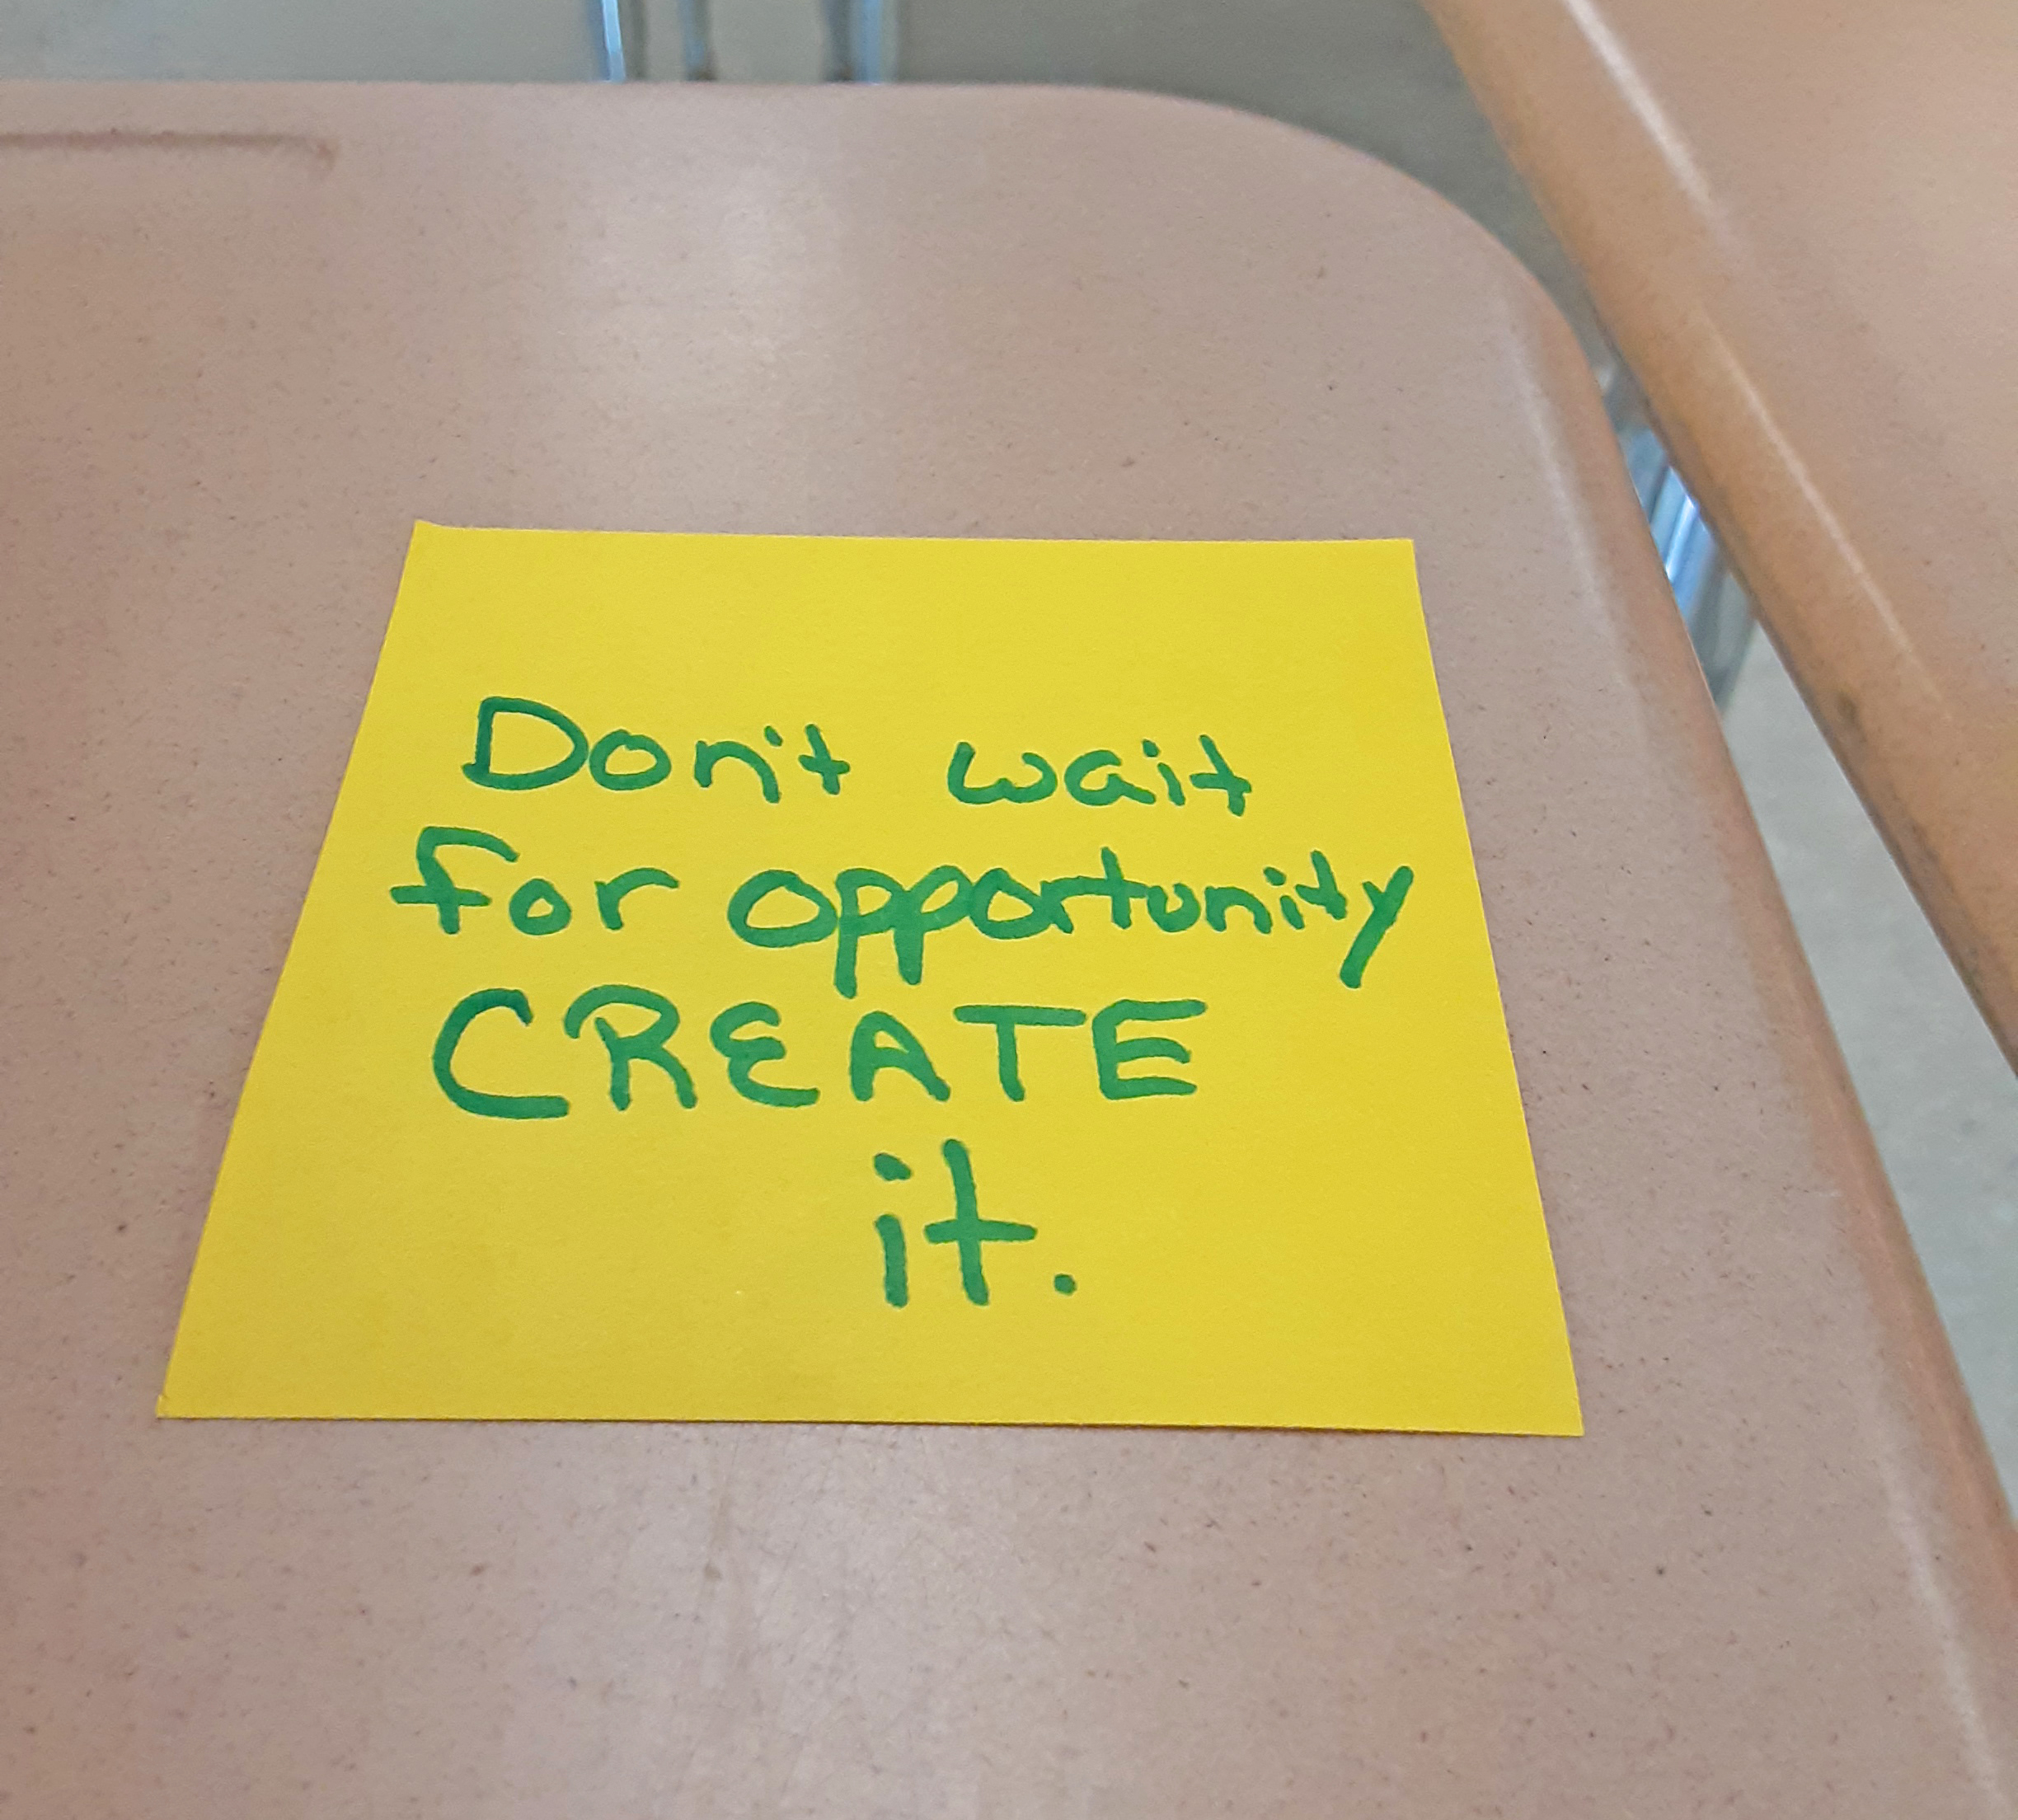 A post-it note left on a desk for a student.